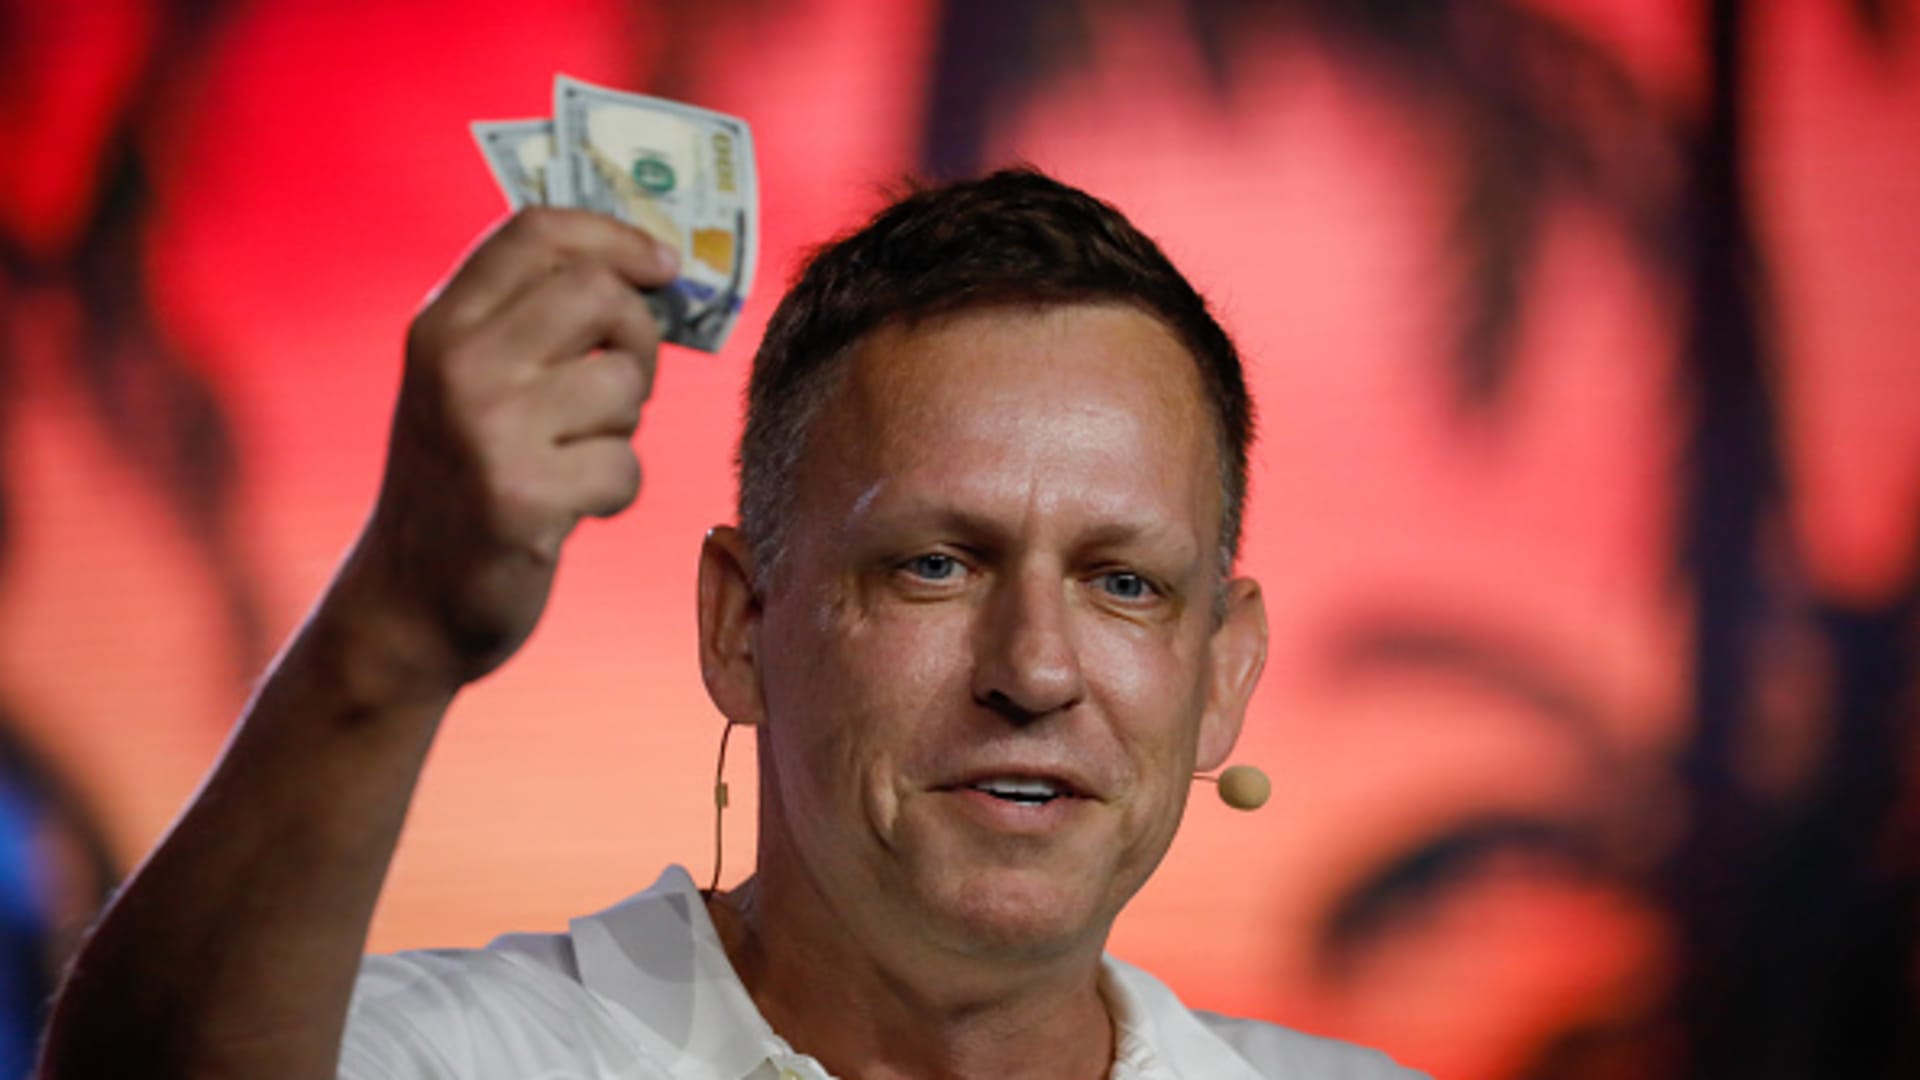 Peter Thiel signals he is done helping J.D. Vance, will fundraise for Blake Masters